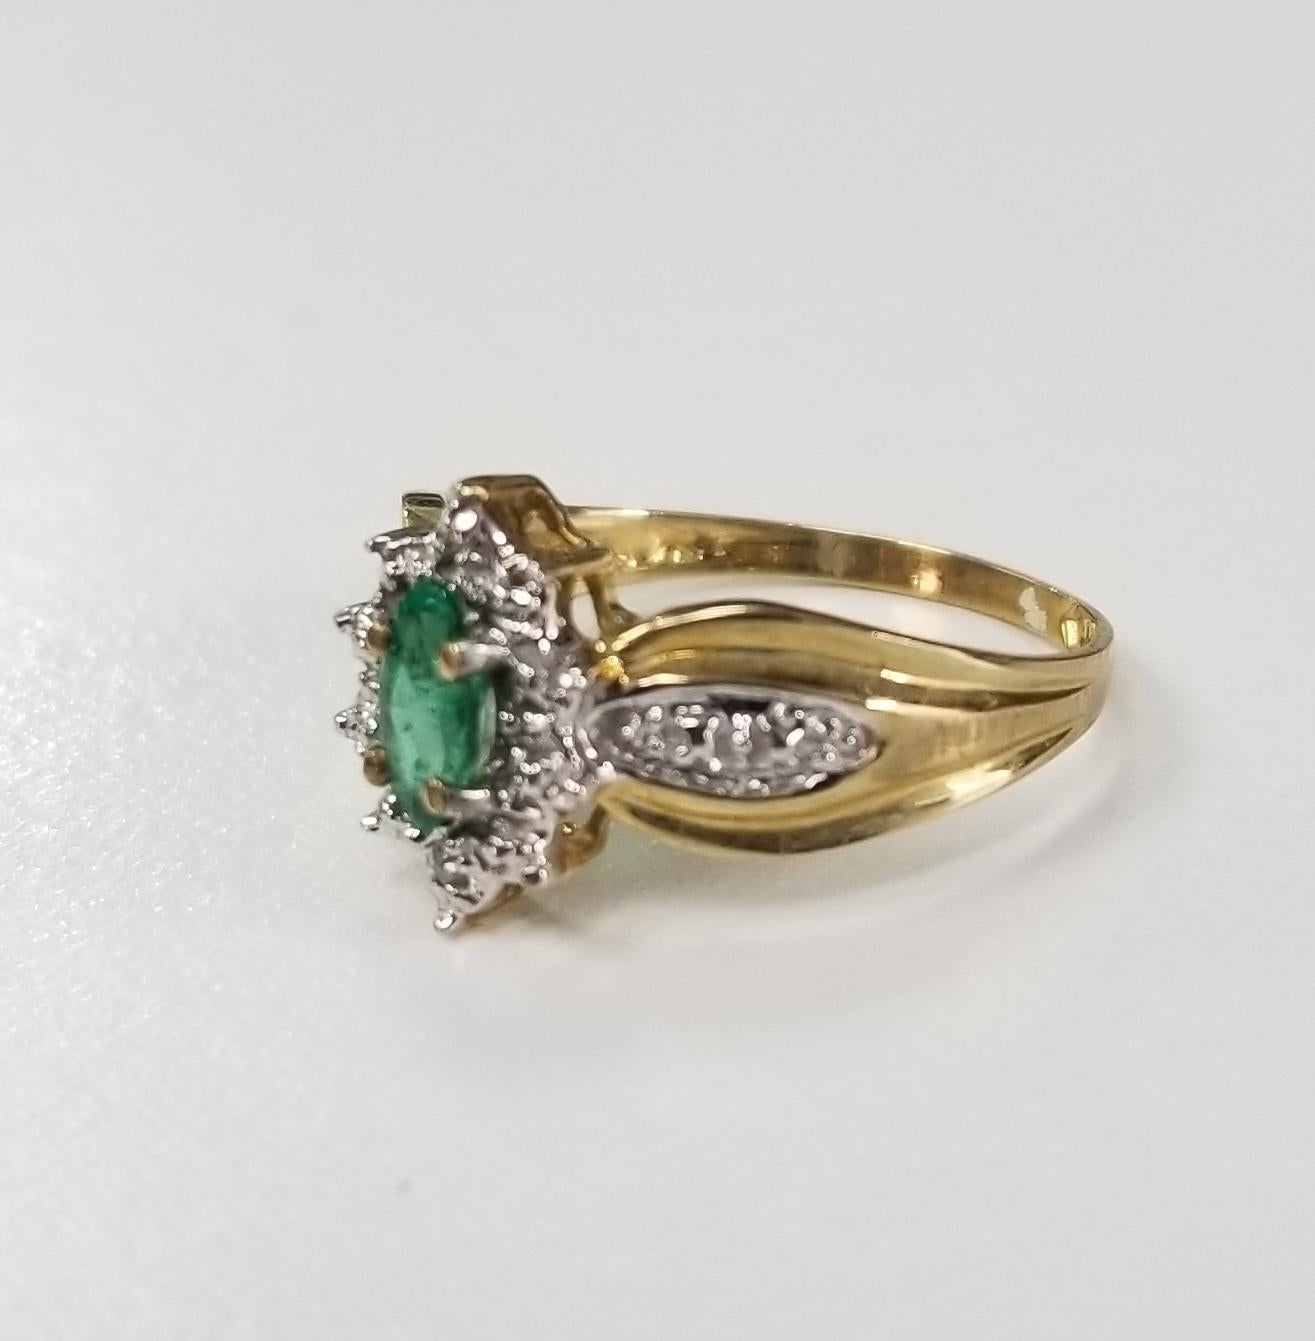 10k yellow gold Emerald and diamond ring, containing 1 marquise shape cut weighing .20pts. and 2 round full cut diamonds weighing .01pts.  This ring is a size 6 but we will size to fit for free.